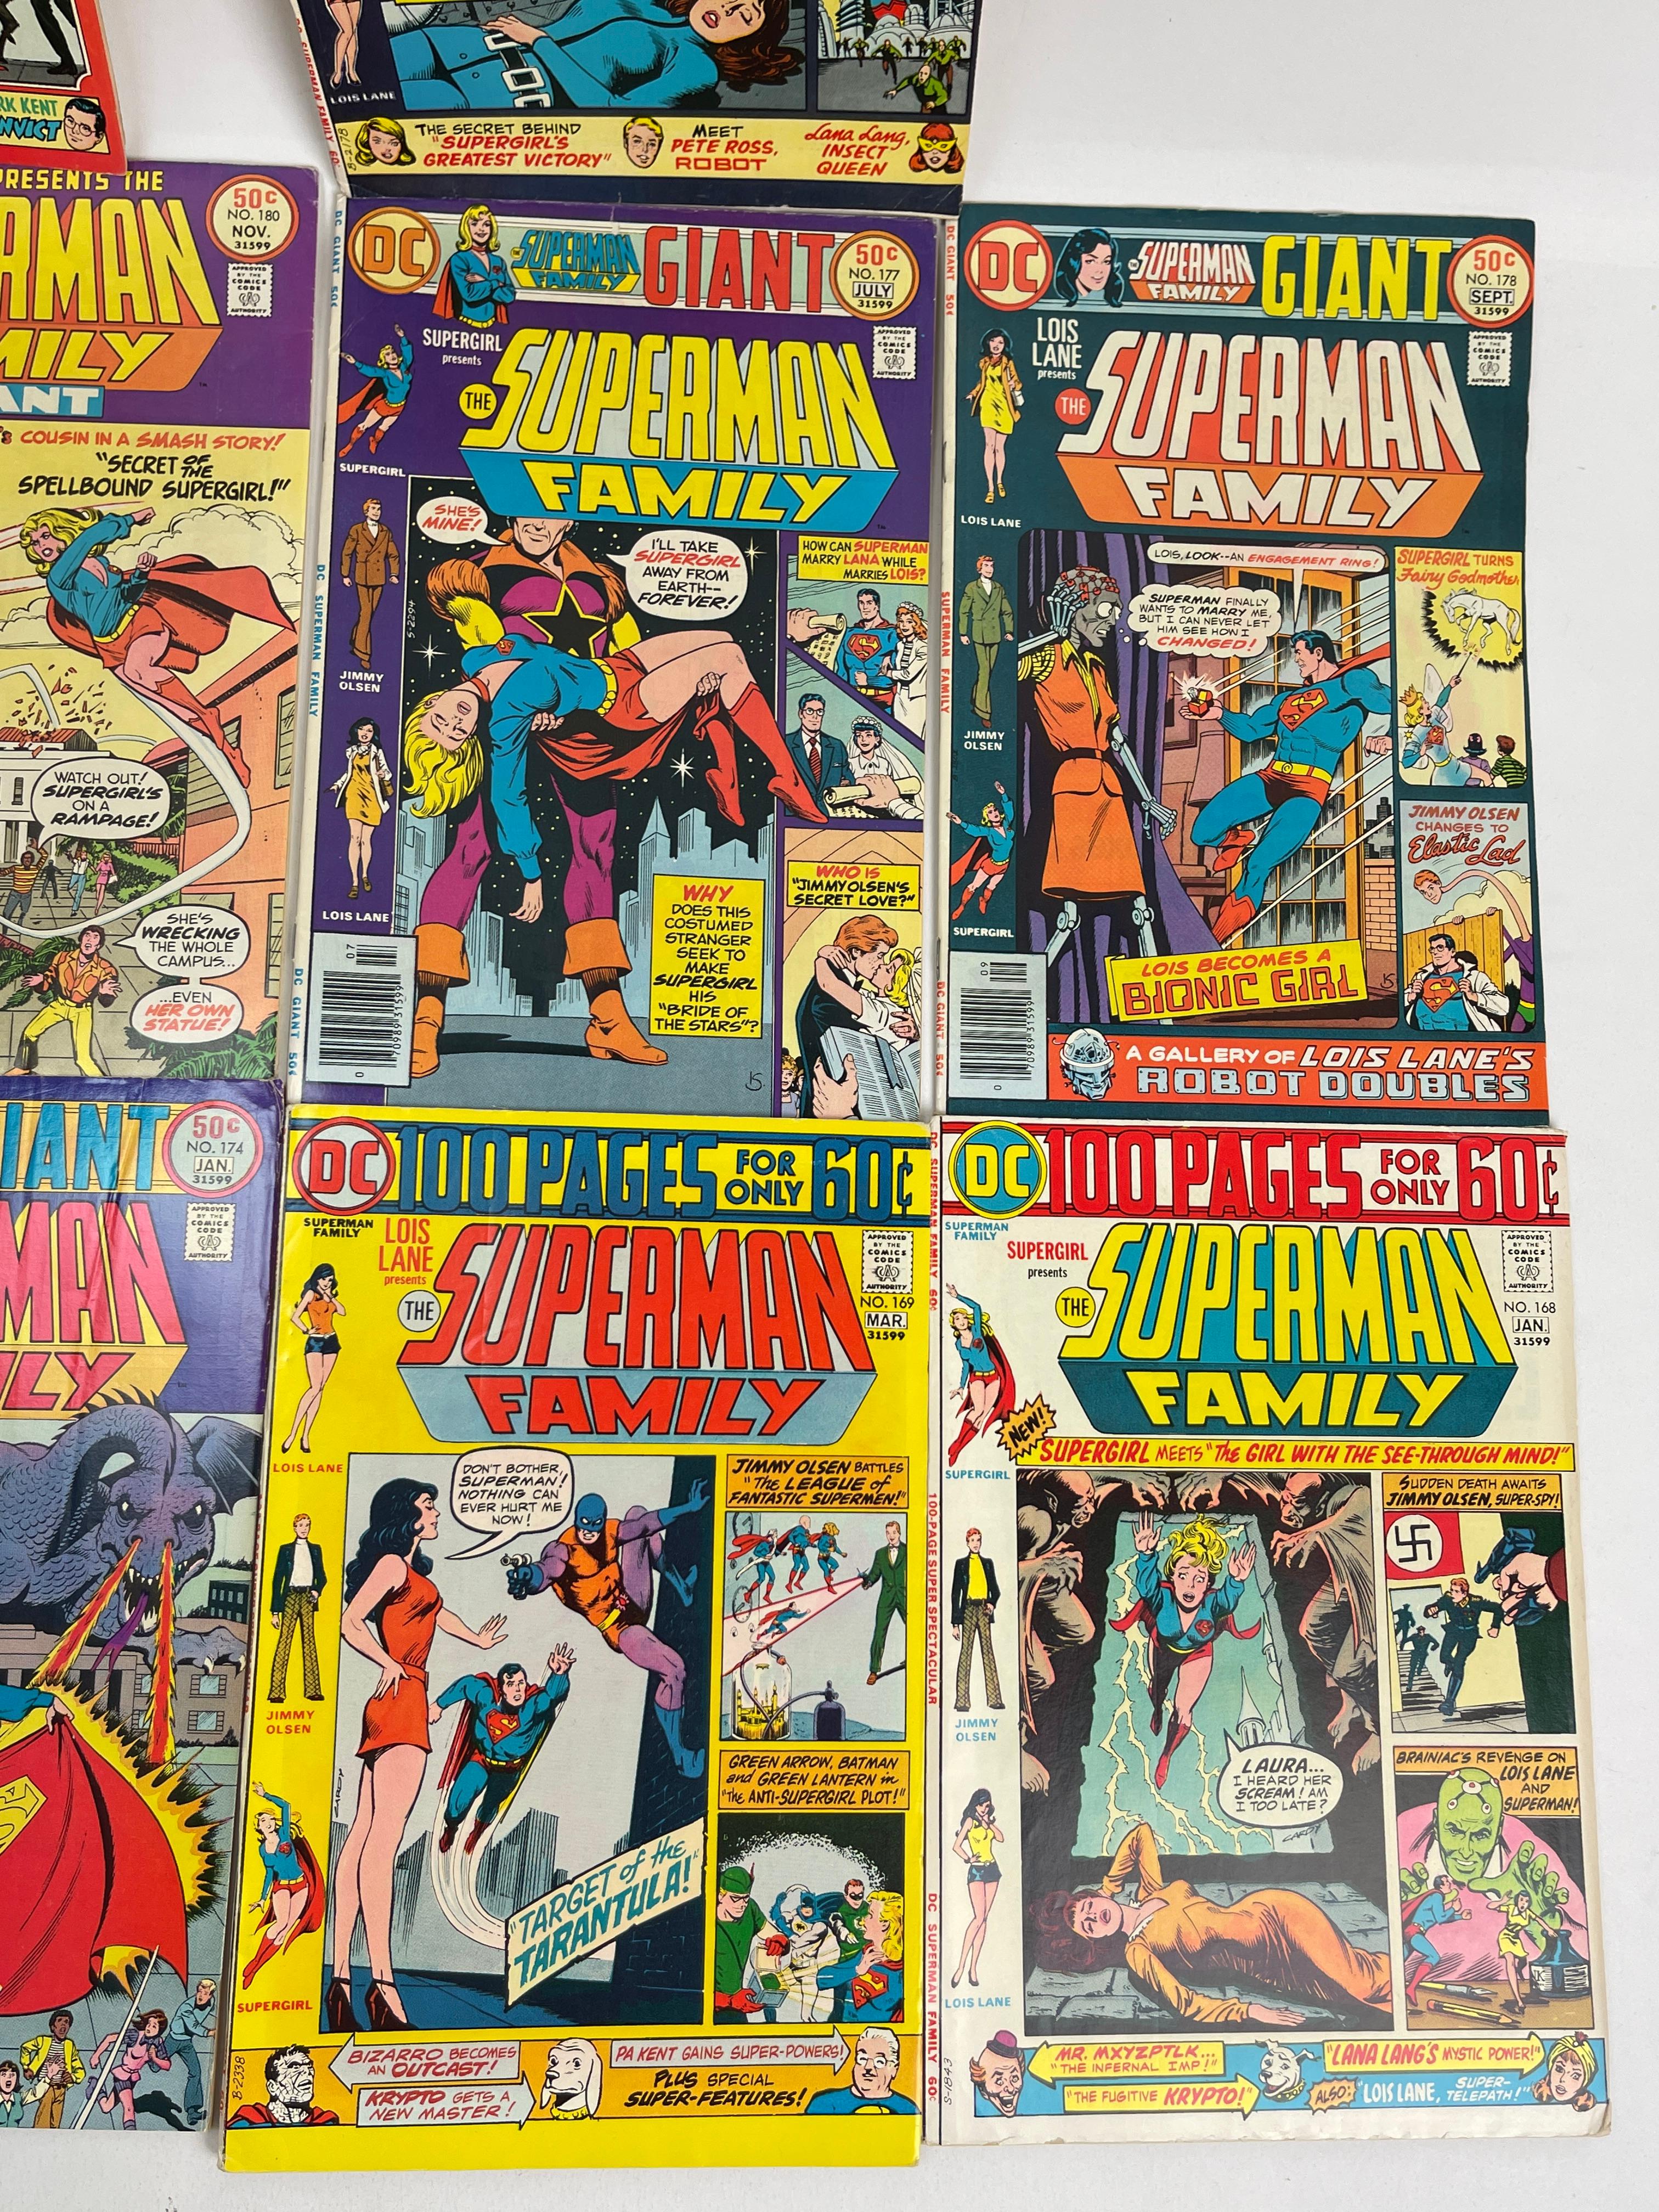 Vintage The Superman Family Marvel DC Comic Book Collection Lot of 10